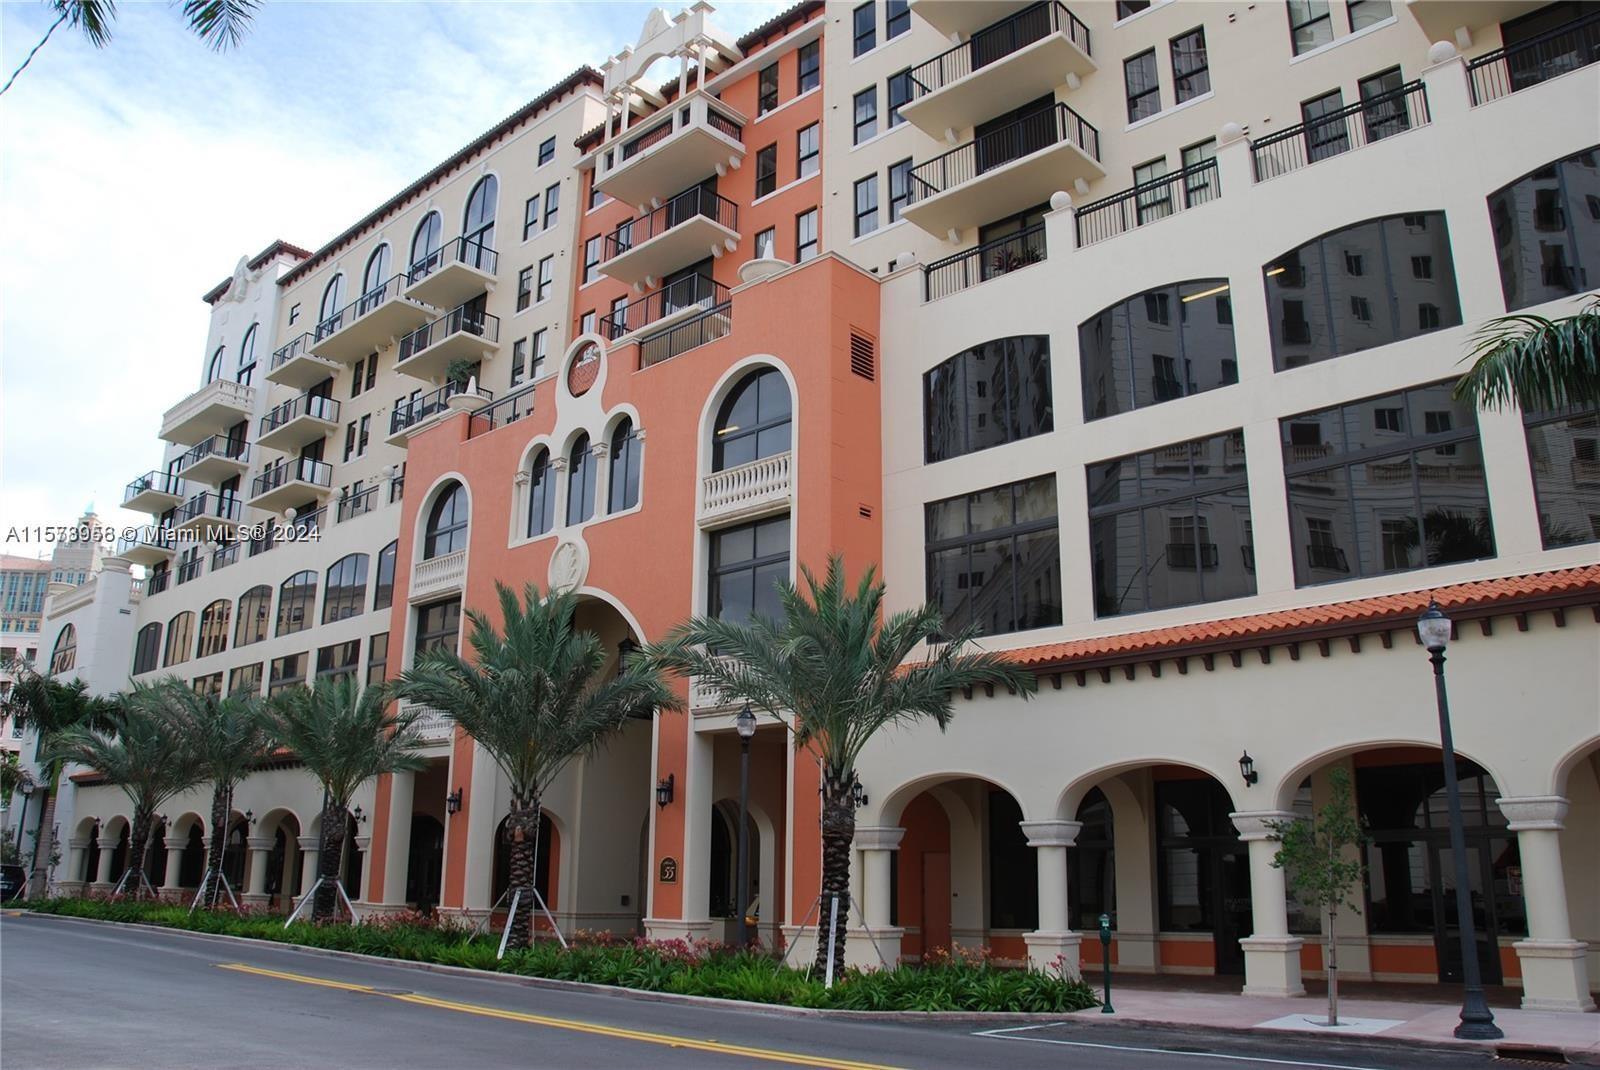 Photo of 55 Merrick Wy #813 in Coral Gables, FL